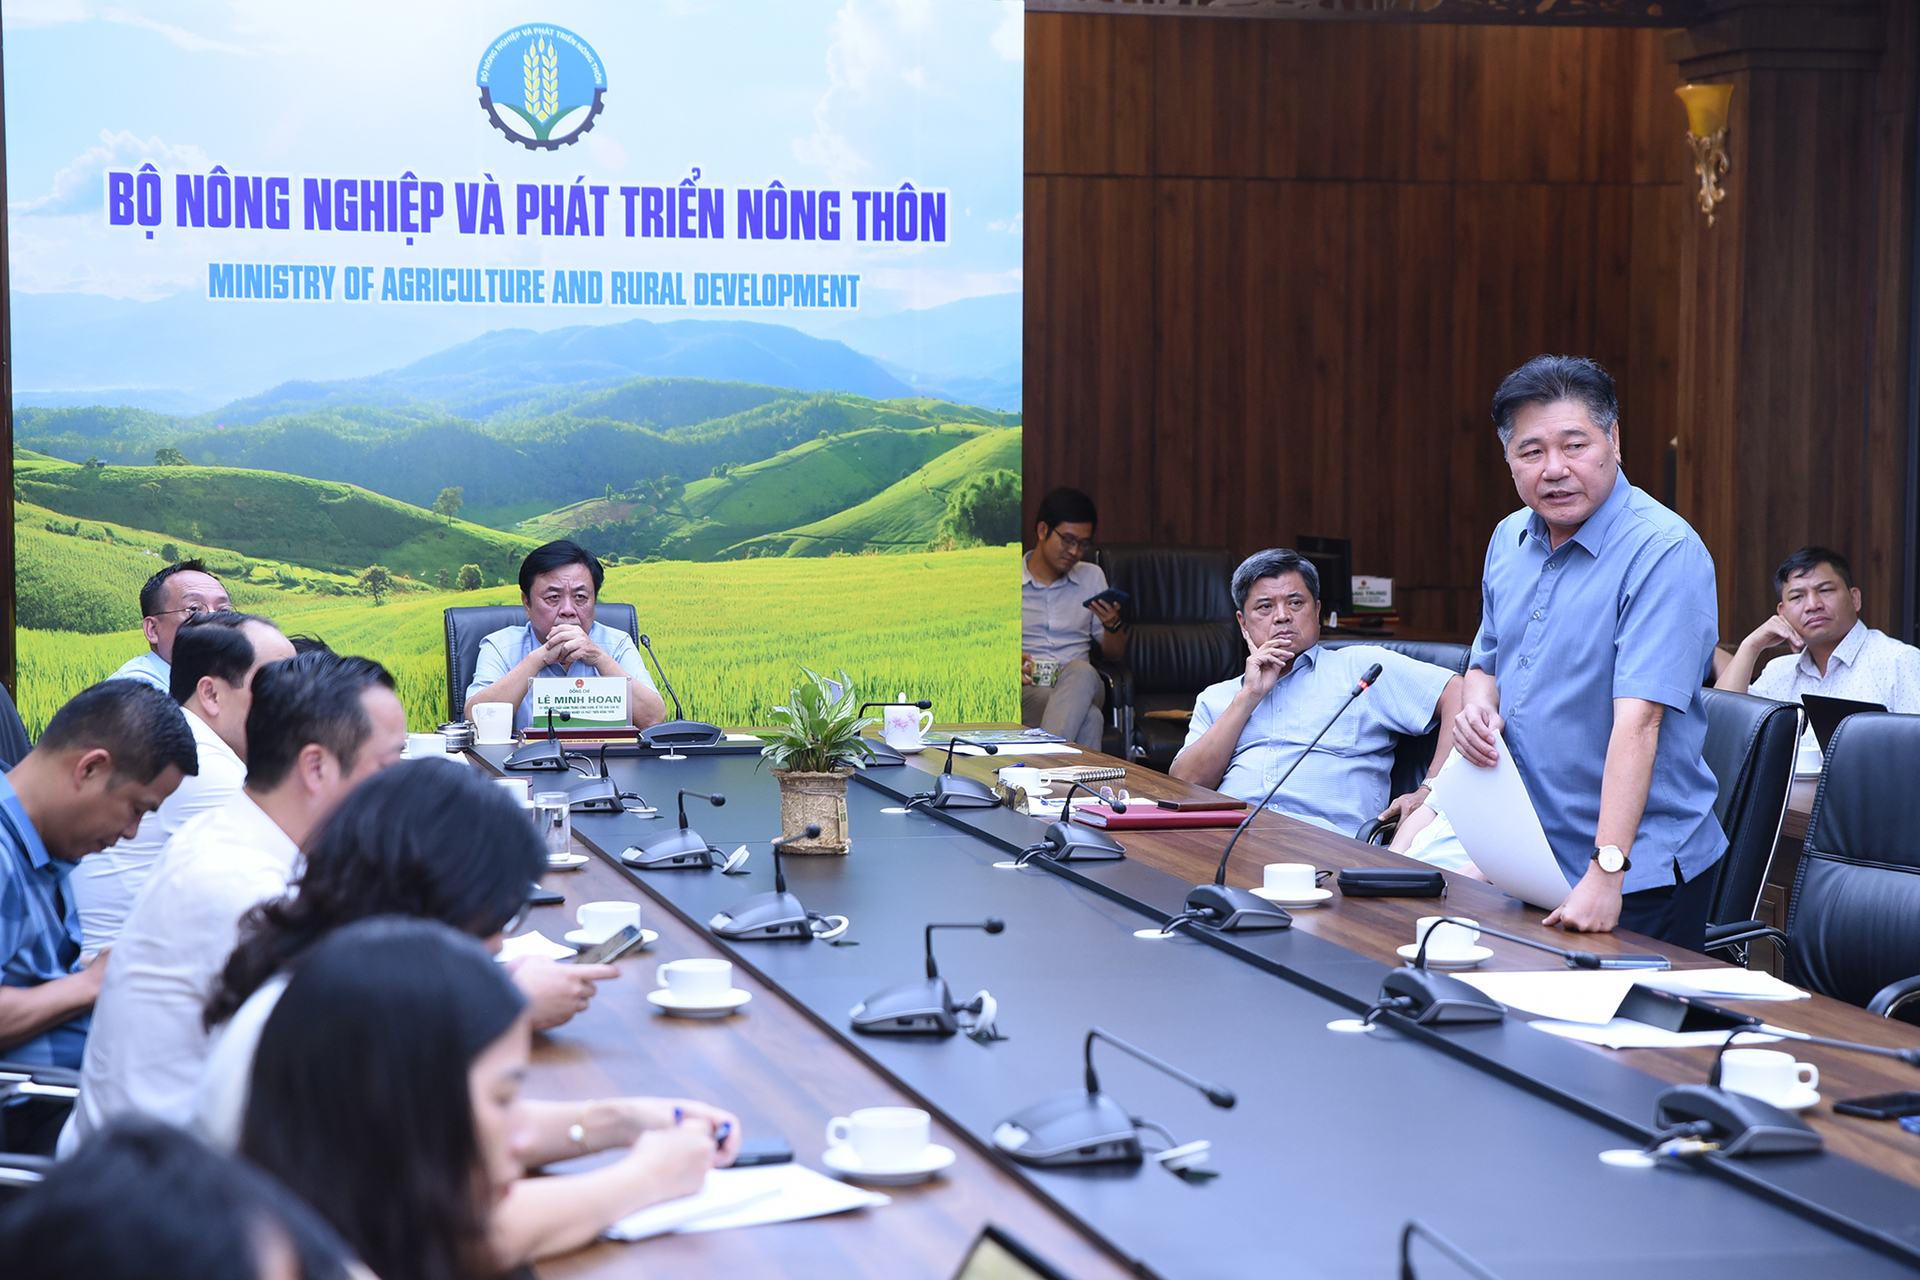 Director of the National Agricultural Extension Center for Le Quoc Thanh reported to Minister of Agriculture and Rural Development Le Minh Hoan on the contents of the working trip in Japan. Photo: Tung Dinh.